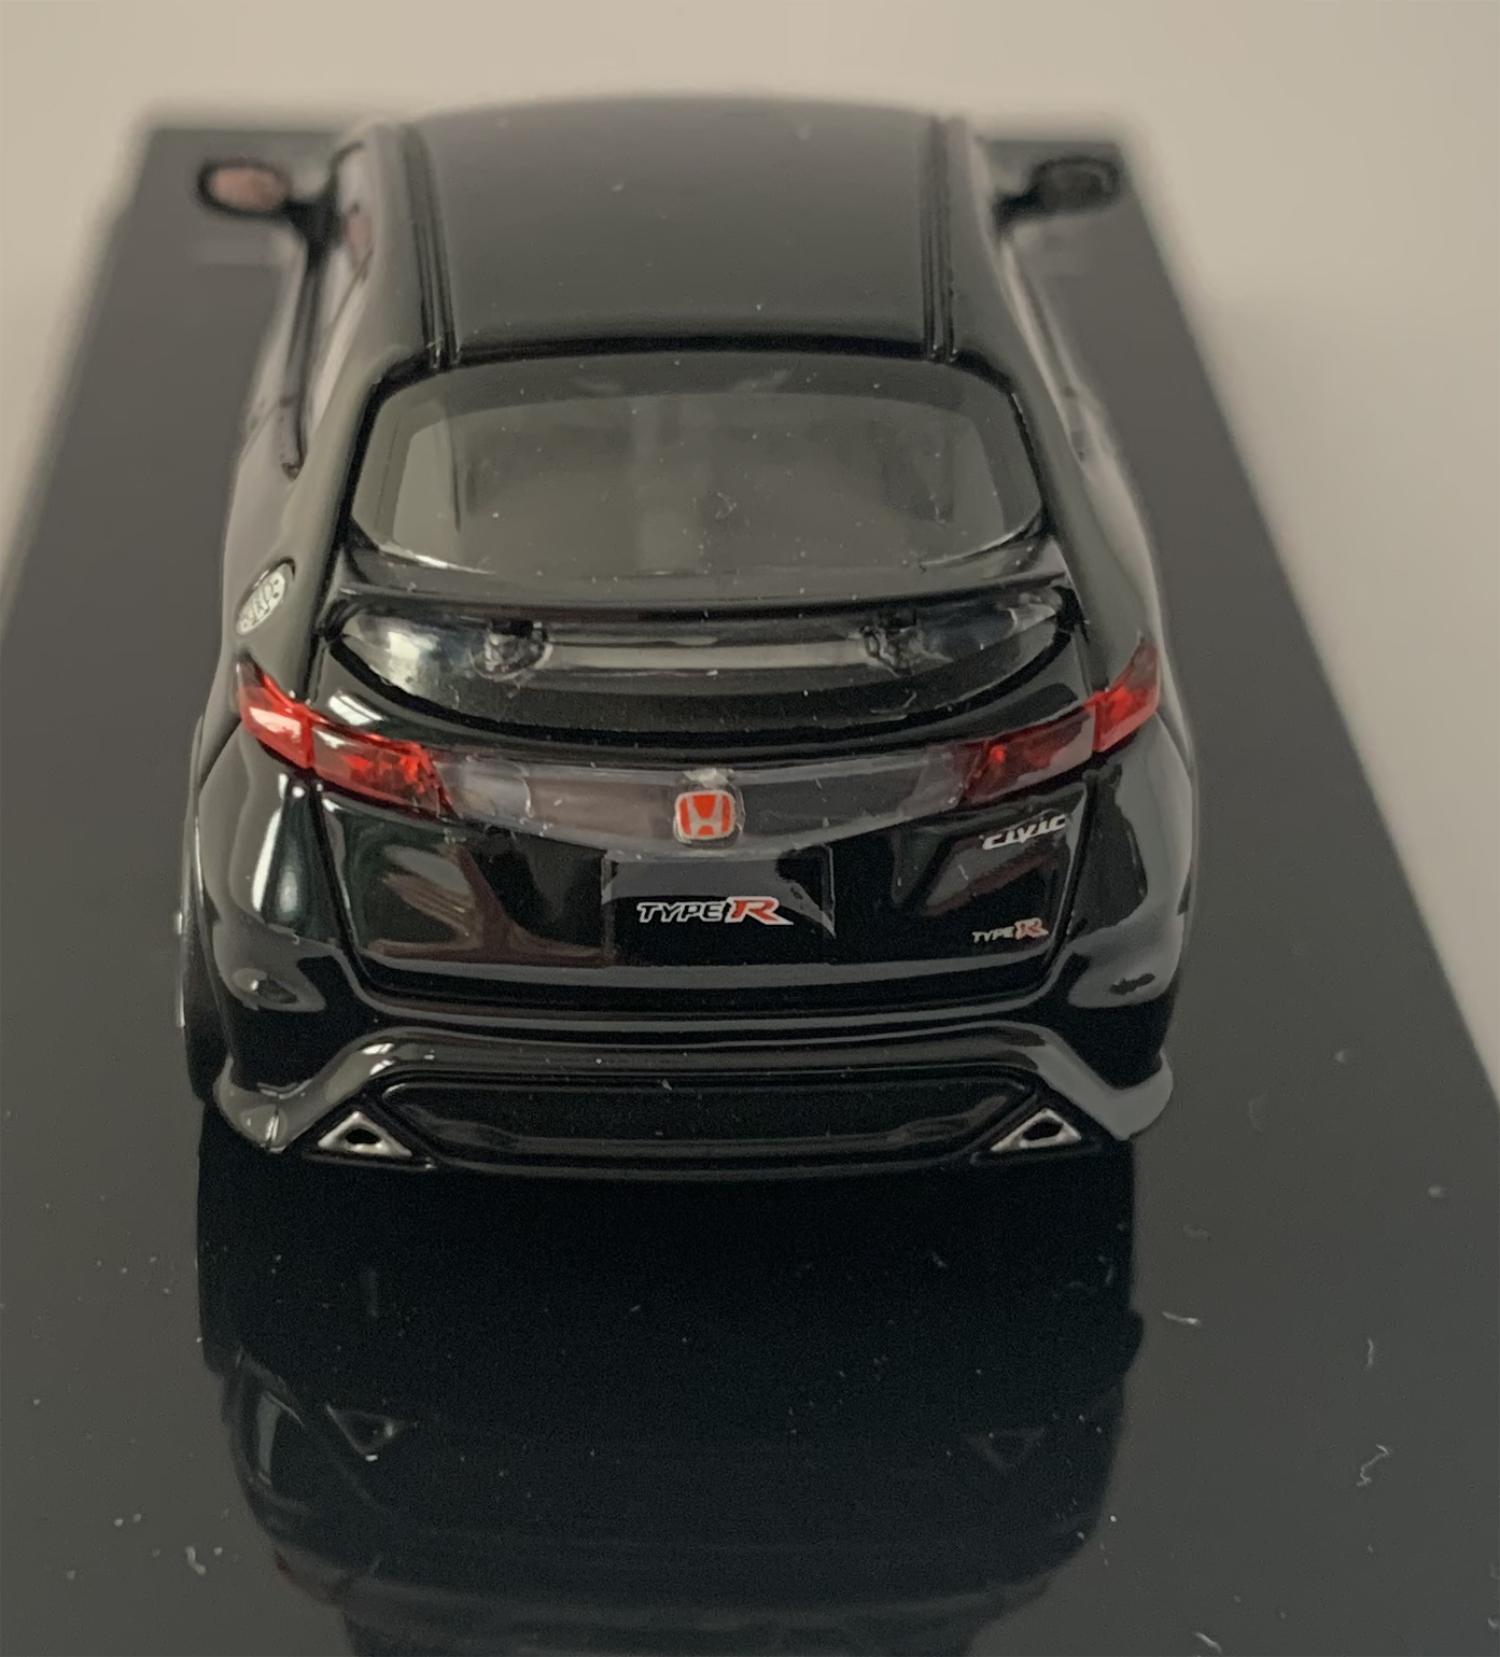 An excellent scale model of a 2007 Honda Civic Type R FN2 Euro is decorated in nighthawk black with high rear spoiler